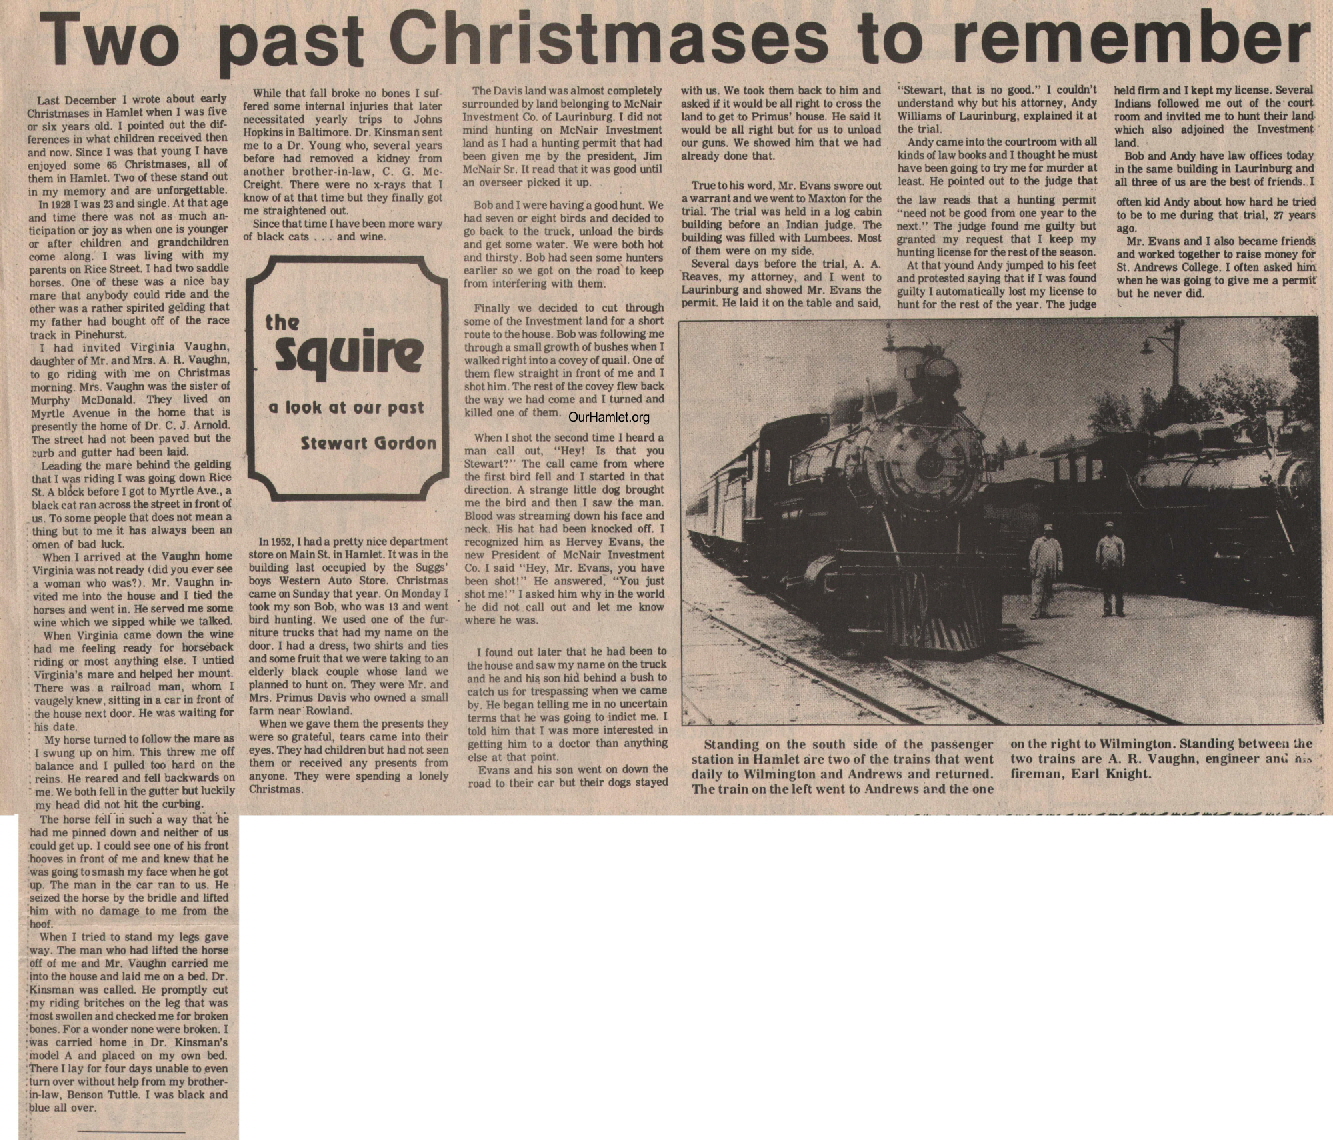 The Squire - Two past Christmases to remember OH